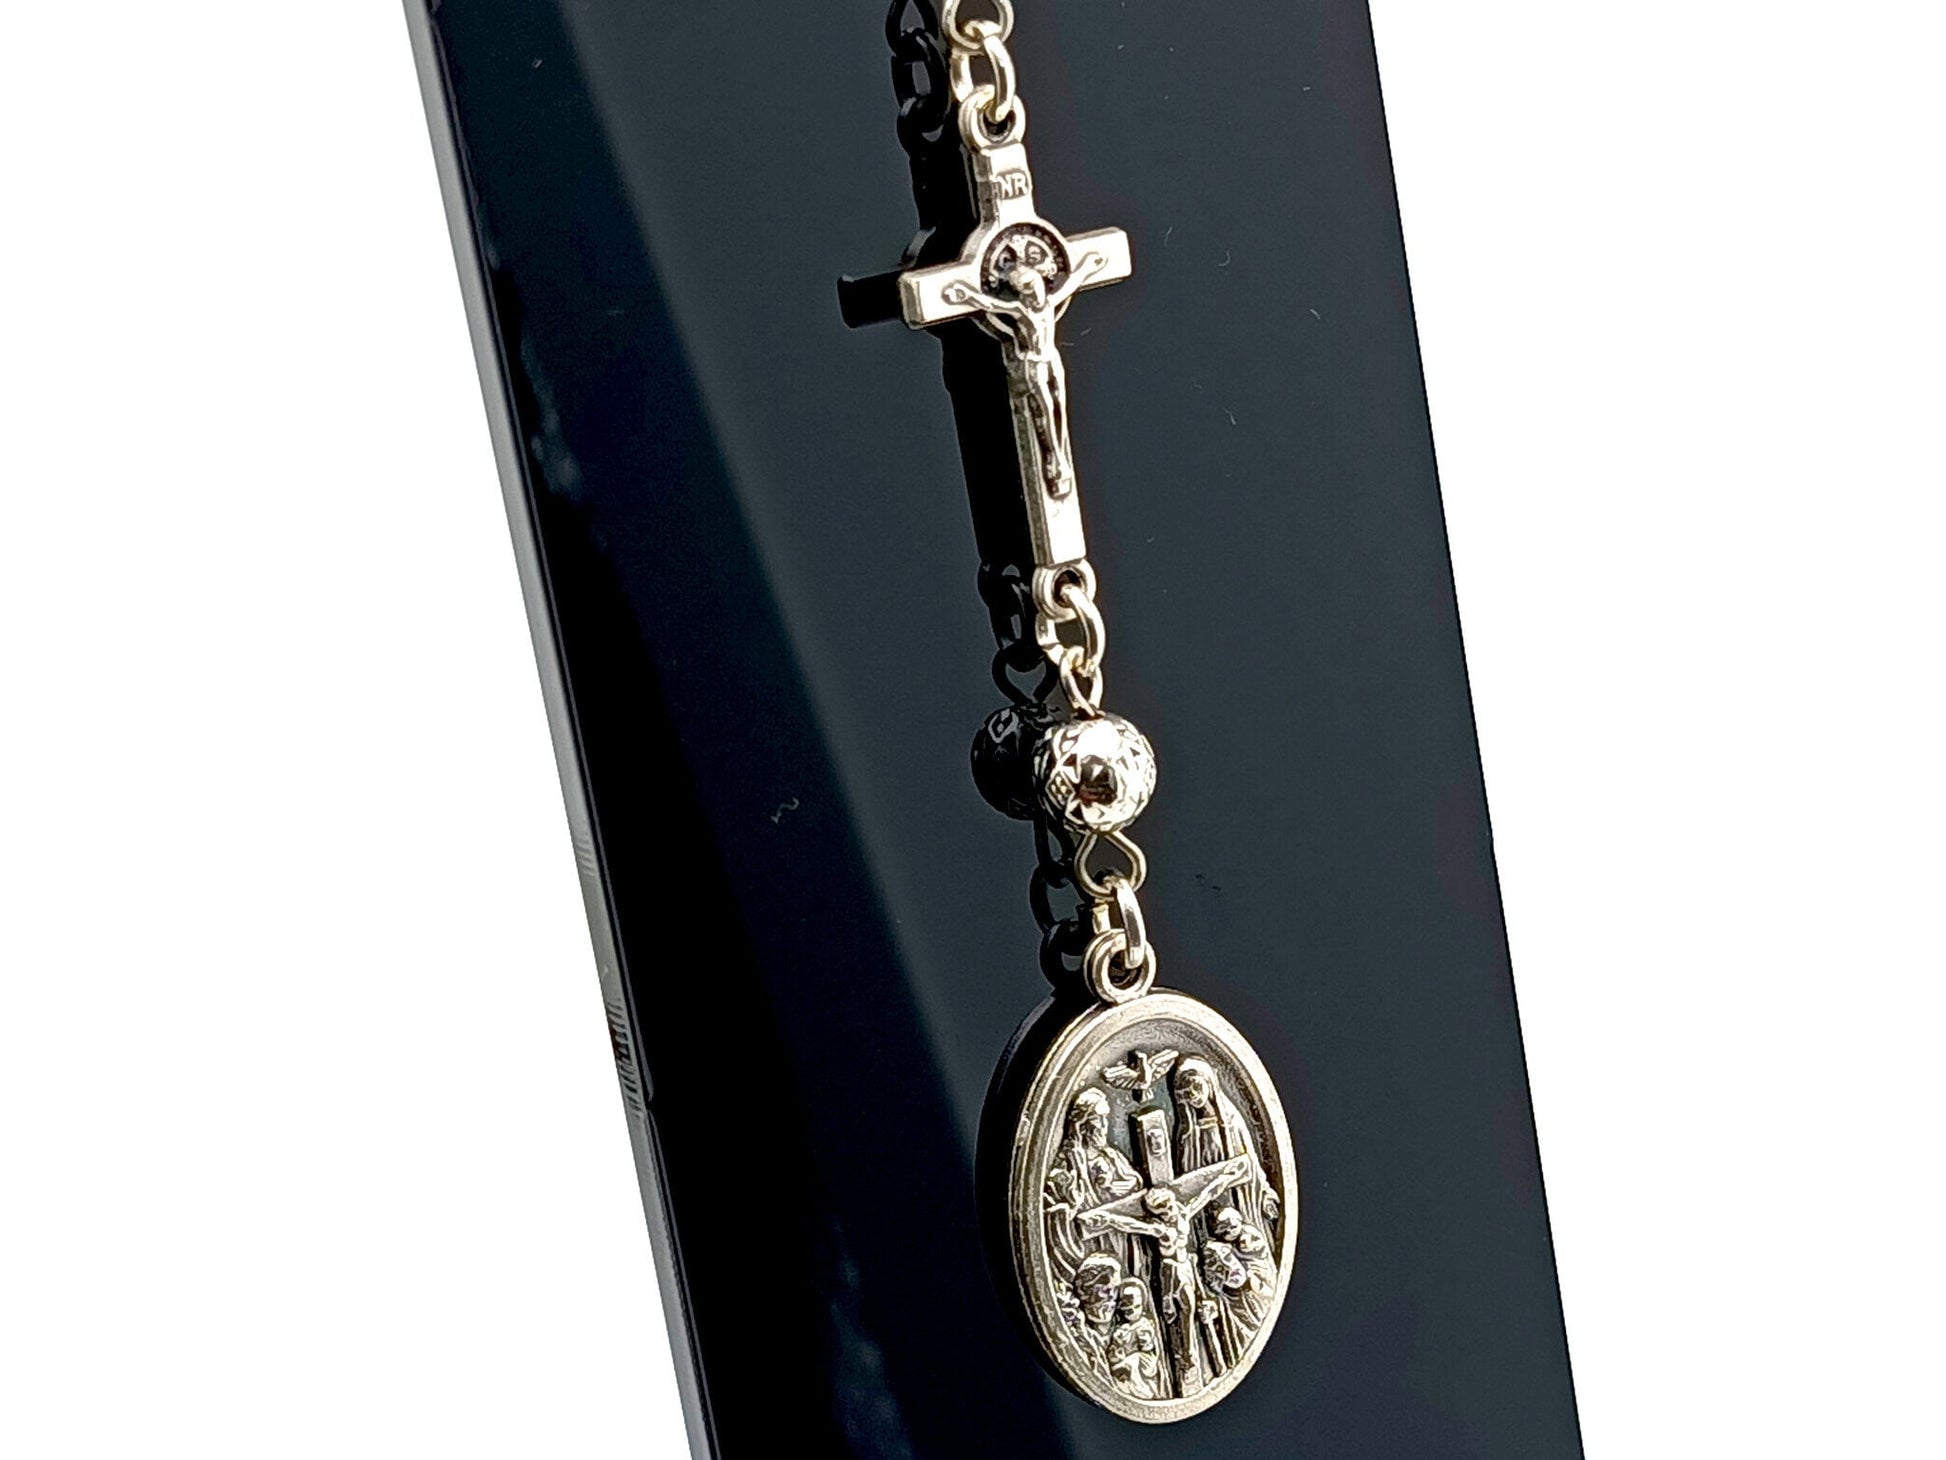 The Crucifixion unique rosary beads purse clip with Saint Benedict crucifix, silver medal and clip.